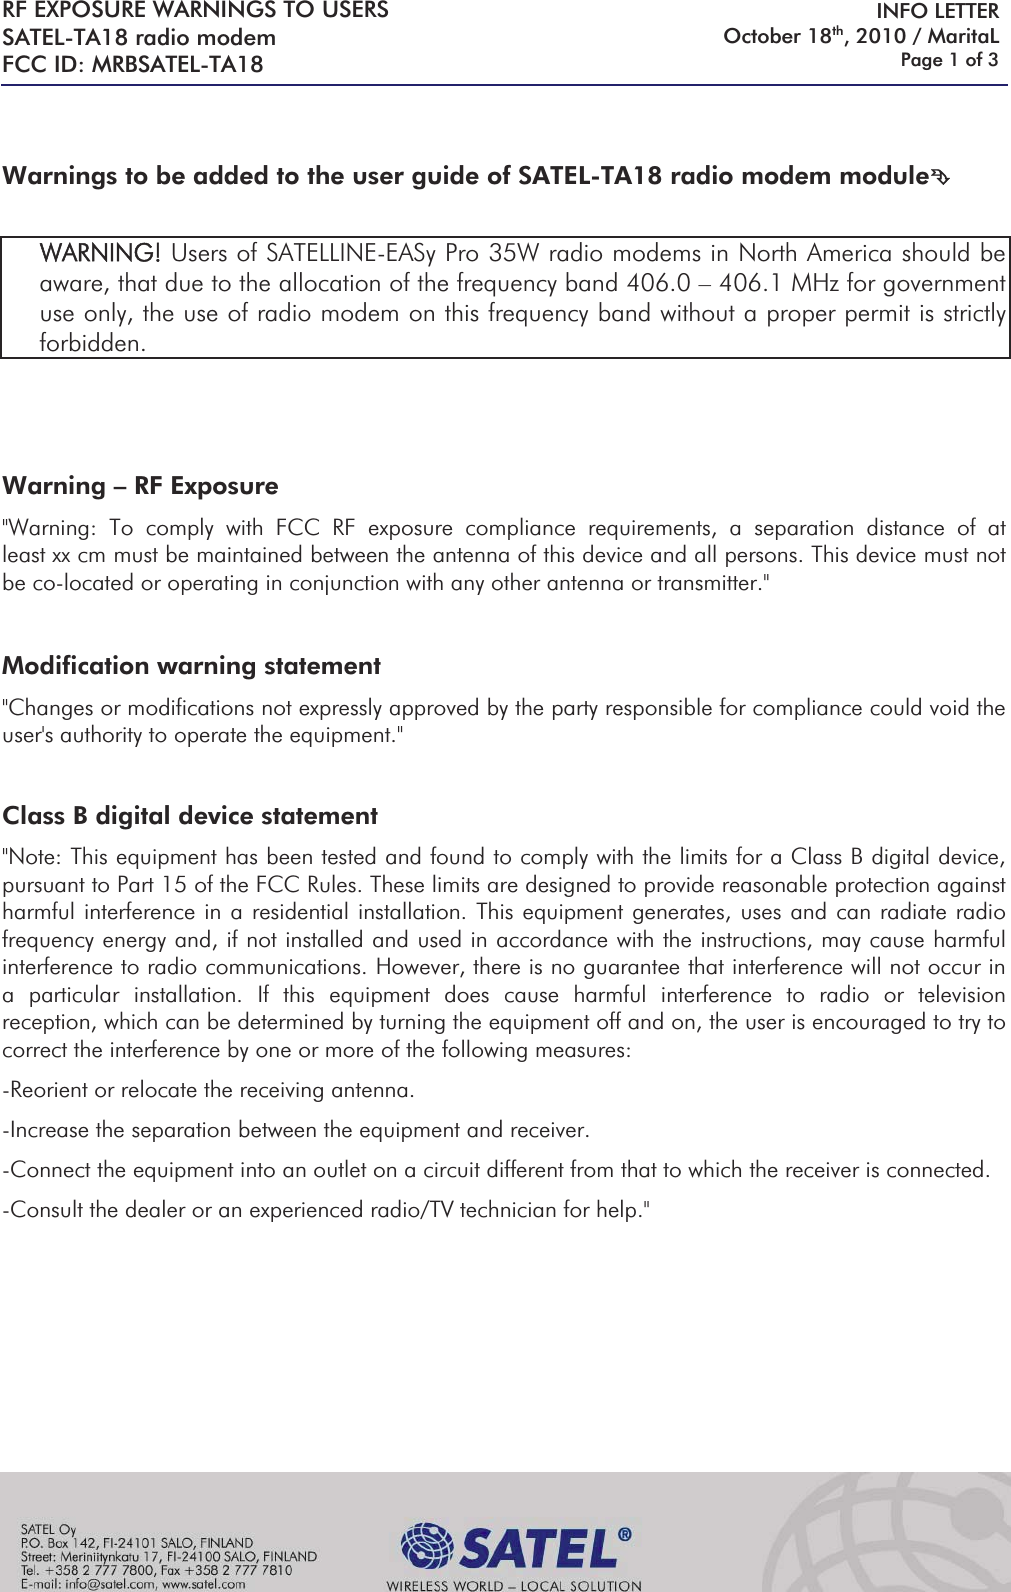 RF EXPOSURE WARNINGS TO USERS SATEL-TA18 radio modem  FCC ID: MRBSATEL-TA18     INFO LETTER October 18th, 2010 / MaritaL Page 1 of 3    Warnings to be added to the user guide of SATEL-TA18 radio modem module°   WARNING! Users of SATELLINE-EASy Pro 35W radio modems in North America should be aware, that due to the allocation of the frequency band 406.0 – 406.1 MHz for government use only, the use of radio modem on this frequency band without a proper permit is strictly forbidden.      Warning – RF Exposure  &quot;Warning: To comply with FCC RF exposure compliance requirements, a separation distance of at least xx cm must be maintained between the antenna of this device and all persons. This device must not be co-located or operating in conjunction with any other antenna or transmitter.&quot;  Modification warning statement &quot;Changes or modifications not expressly approved by the party responsible for compliance could void the user&apos;s authority to operate the equipment.&quot;  Class B digital device statement &quot;Note: This equipment has been tested and found to comply with the limits for a Class B digital device, pursuant to Part 15 of the FCC Rules. These limits are designed to provide reasonable protection against harmful interference in a residential installation. This equipment generates, uses and can radiate radio frequency energy and, if not installed and used in accordance with the instructions, may cause harmful interference to radio communications. However, there is no guarantee that interference will not occur in a particular installation. If this equipment does cause harmful interference to radio or television reception, which can be determined by turning the equipment off and on, the user is encouraged to try to correct the interference by one or more of the following measures: -Reorient or relocate the receiving antenna. -Increase the separation between the equipment and receiver. -Connect the equipment into an outlet on a circuit different from that to which the receiver is connected. -Consult the dealer or an experienced radio/TV technician for help.&quot;        